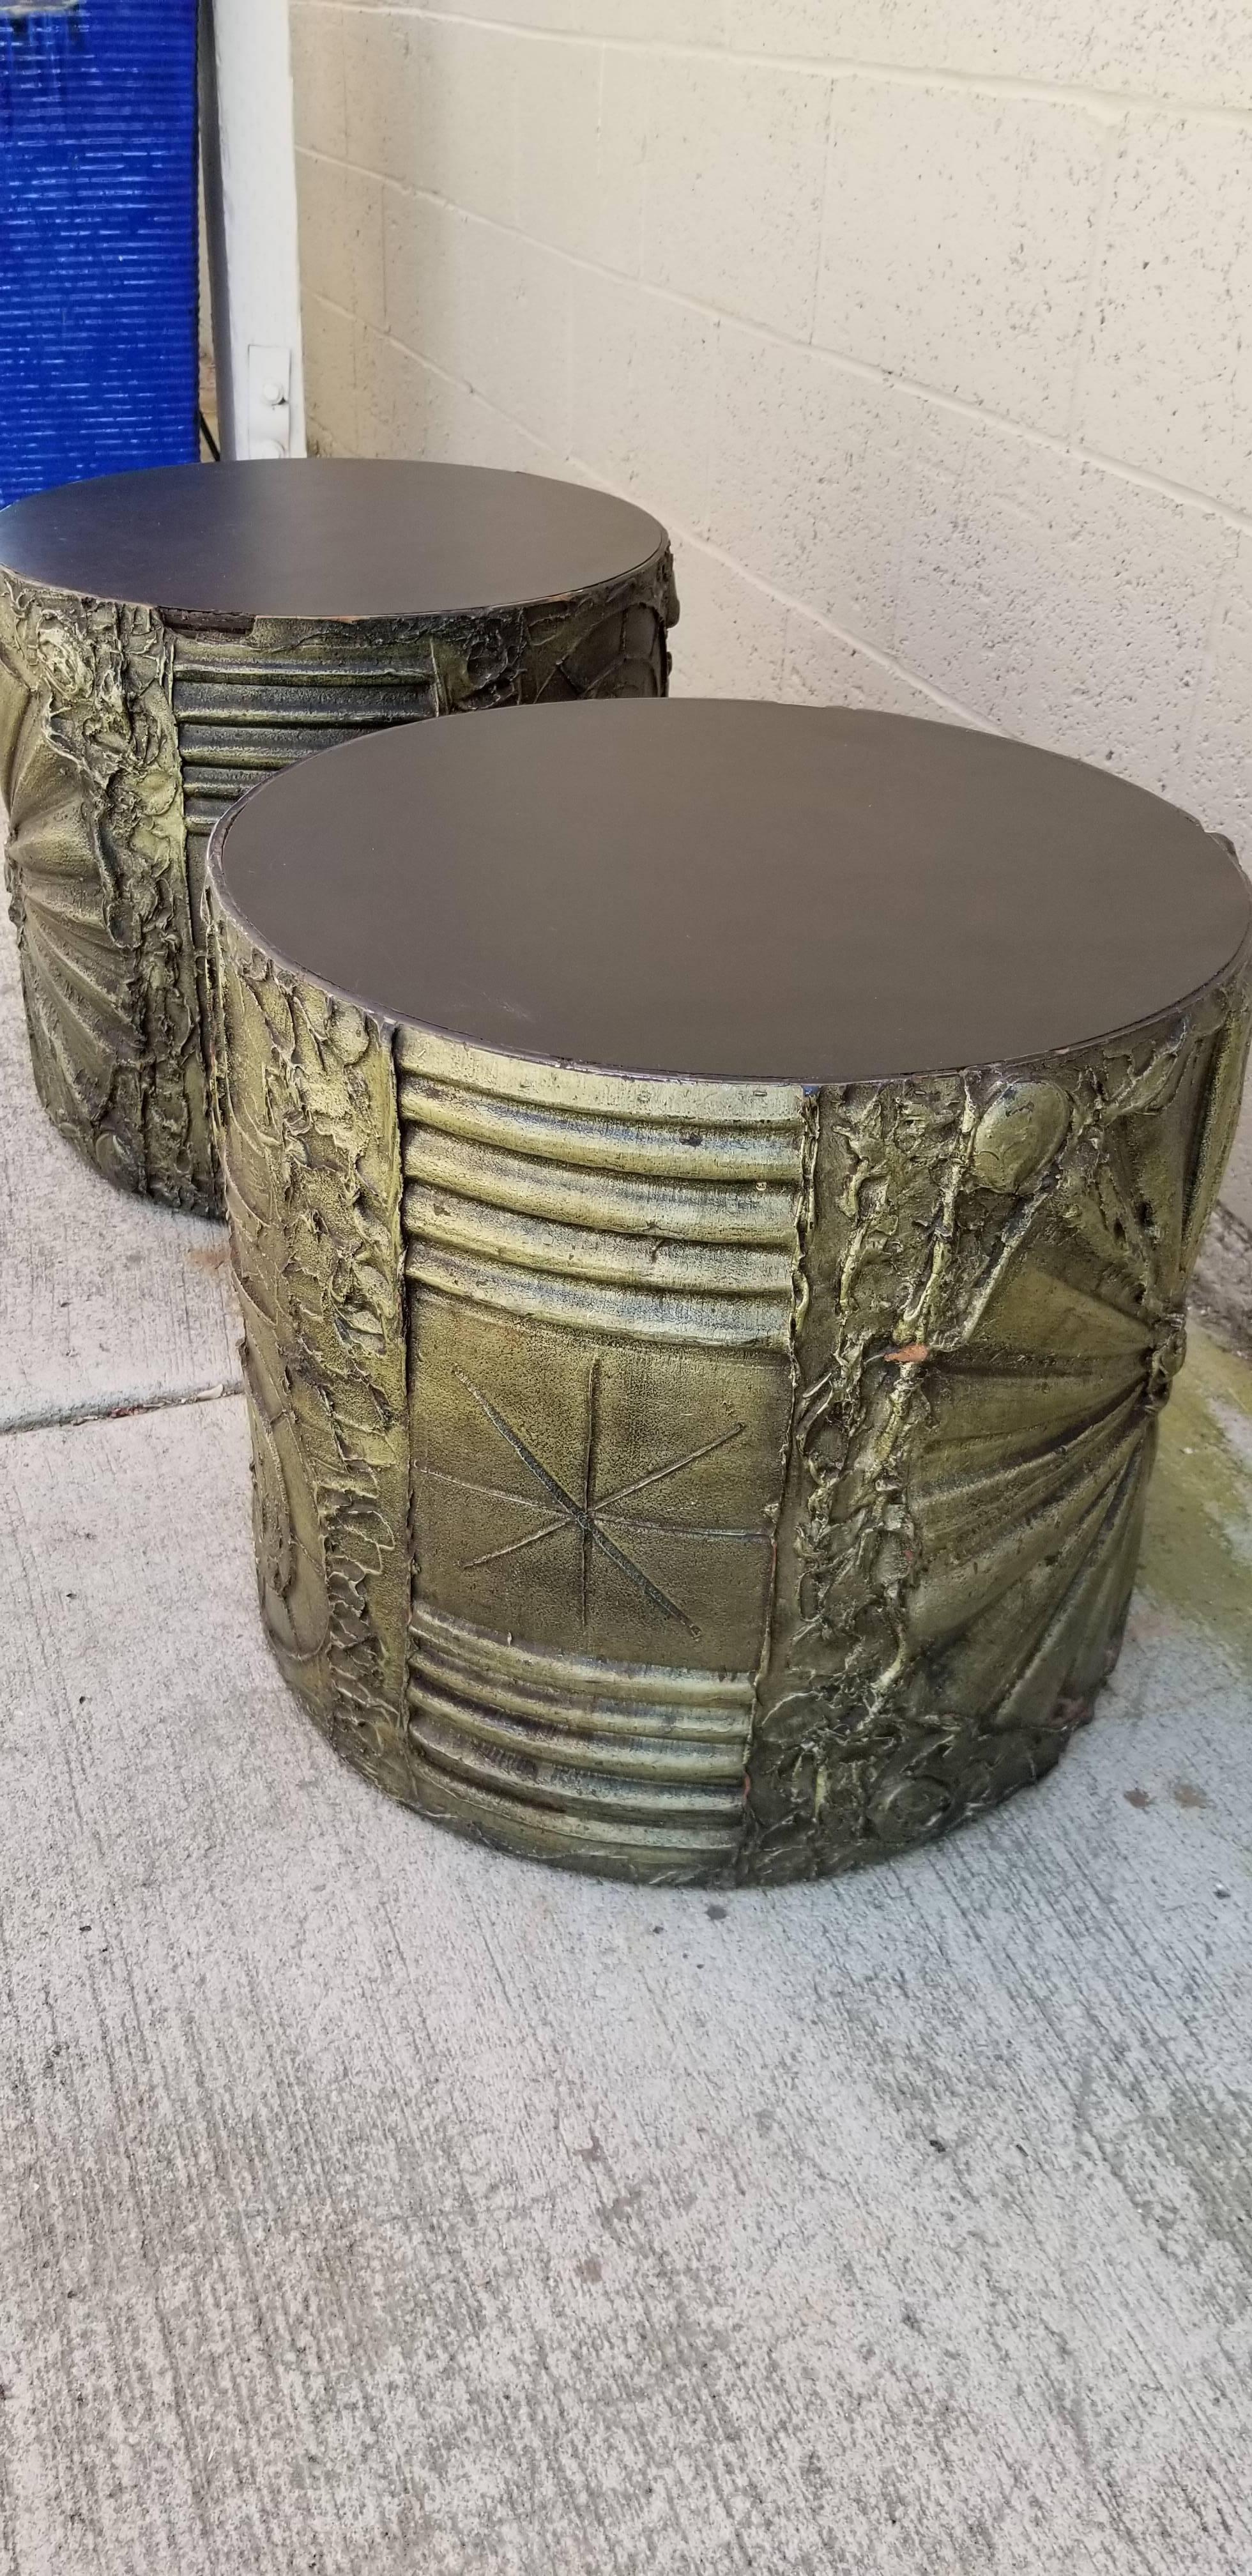 A pair of Brutalist end tables designed by Adrian Pearsall for Craft Associates, circa 1970. Original finish and condition. Display nicely, but have some areas resin loss. A glass top could be added if desired. Created in the style of Paul Evans.